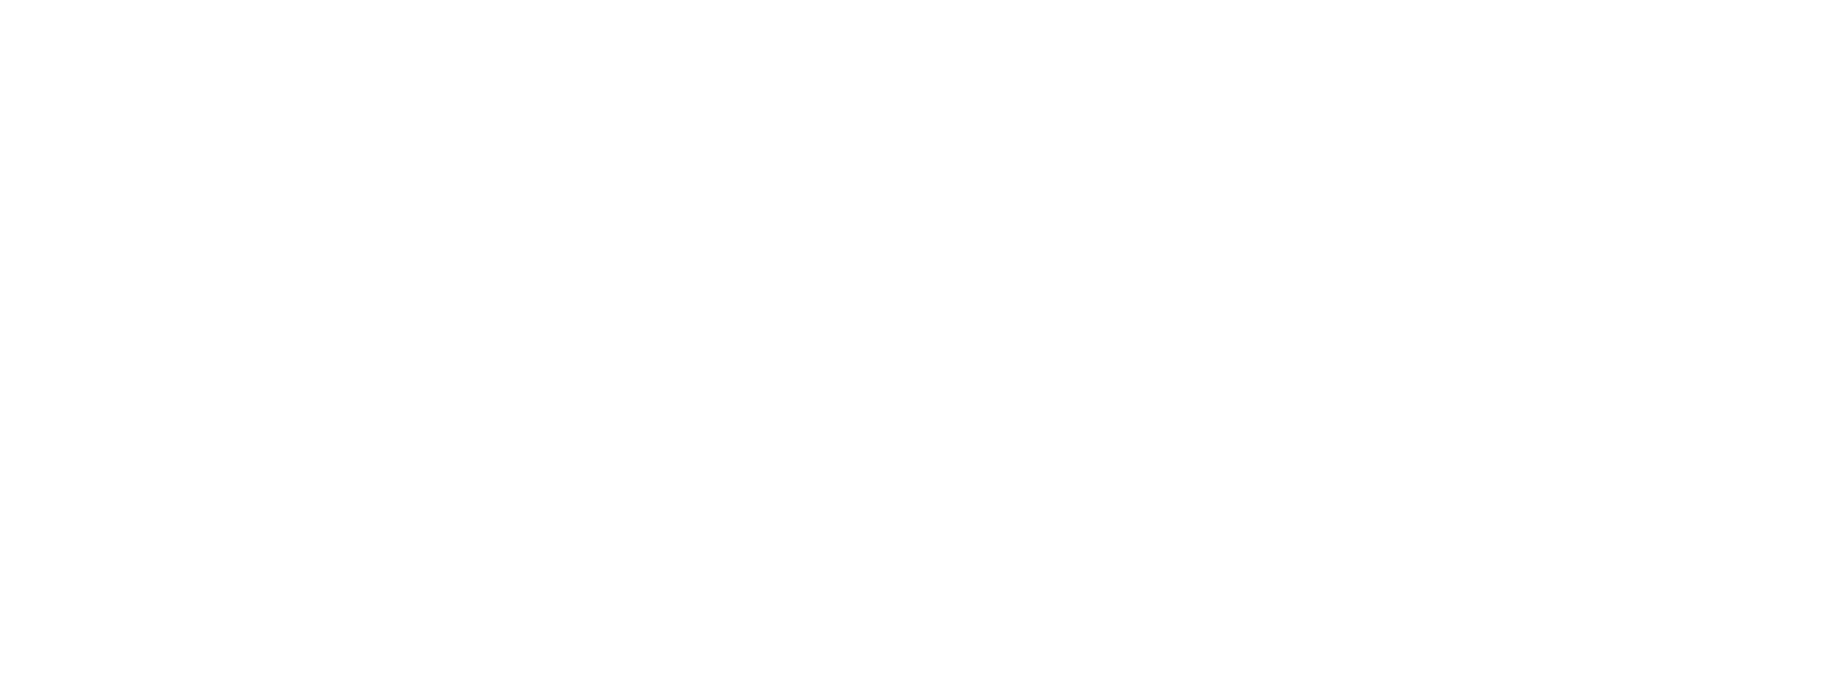 Swift  Global Delivery